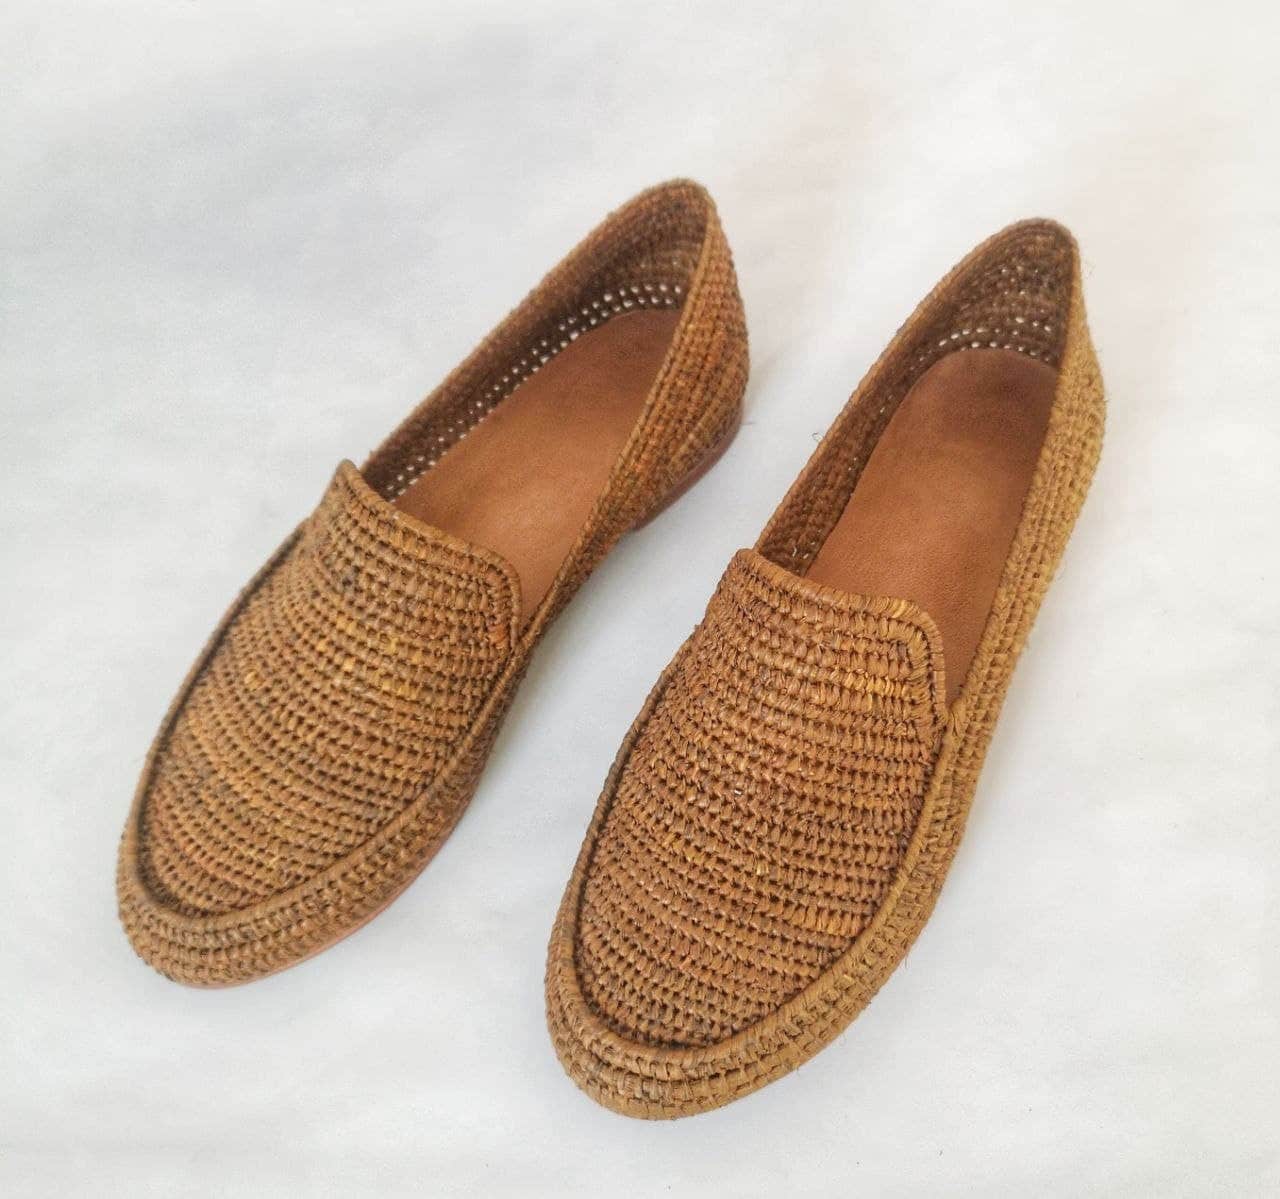 Leather Shoes, Women Leather Laces Shoes, Women Moccasins, Loafers Women, Leather Women Oxfords, Women Sneakers.